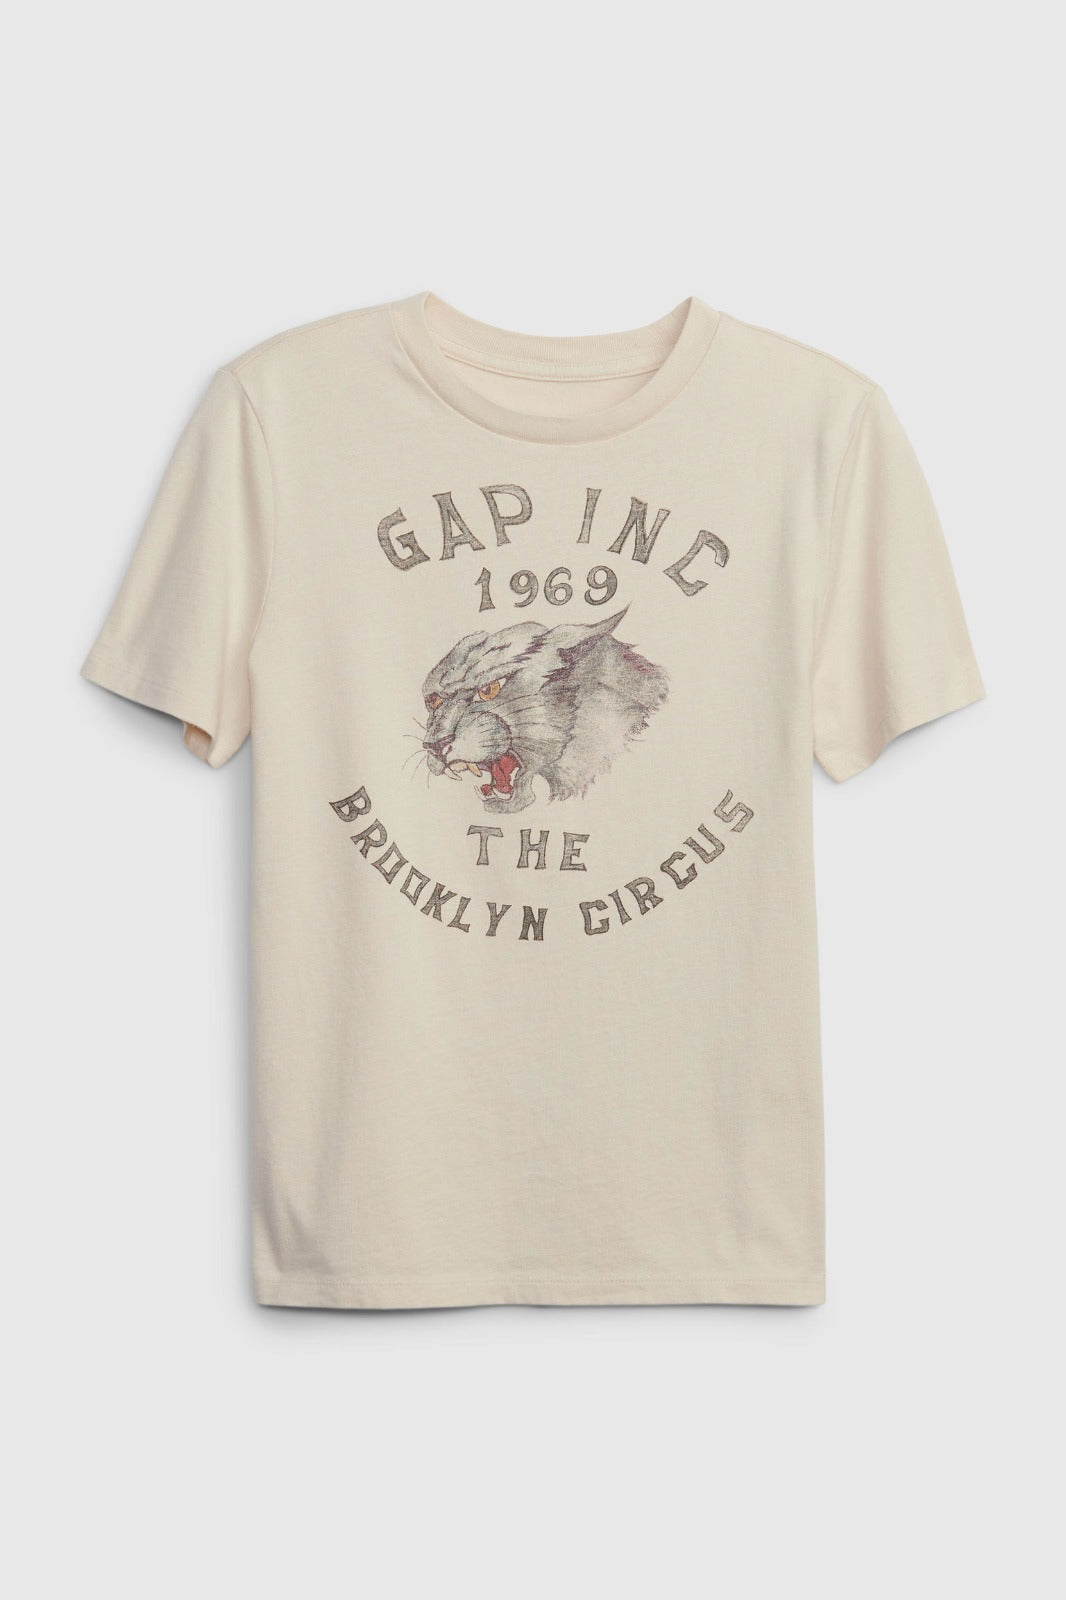 Kids Gap × The Brooklyn Circus Graphic T-Shirt (Old Stone)